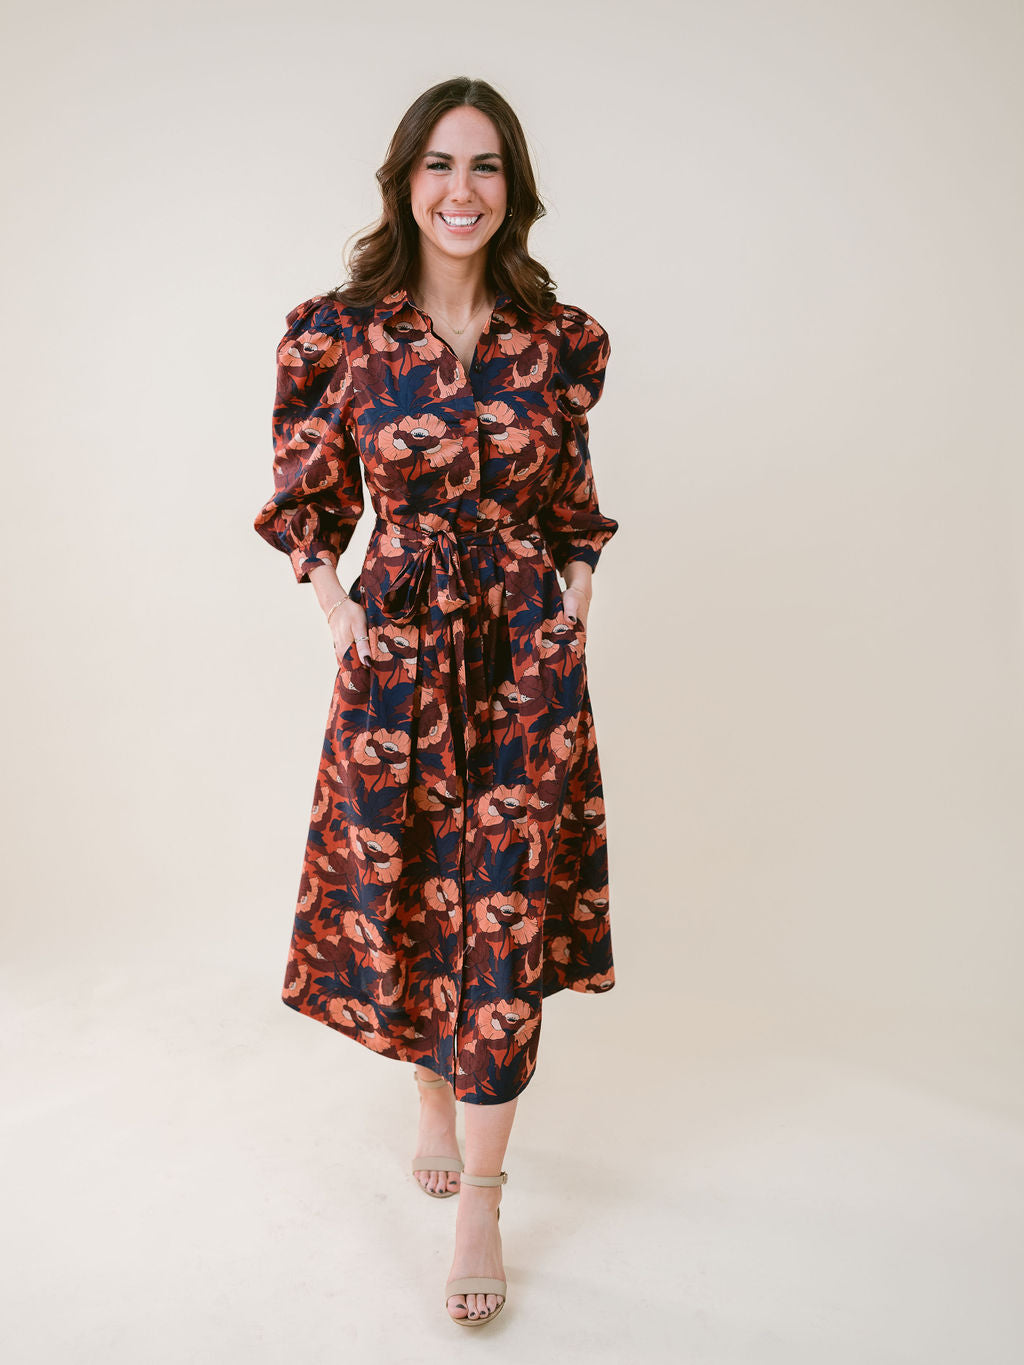 Floral Print Long Sleeve Dress in Tana Lawn Cotton/liberty of